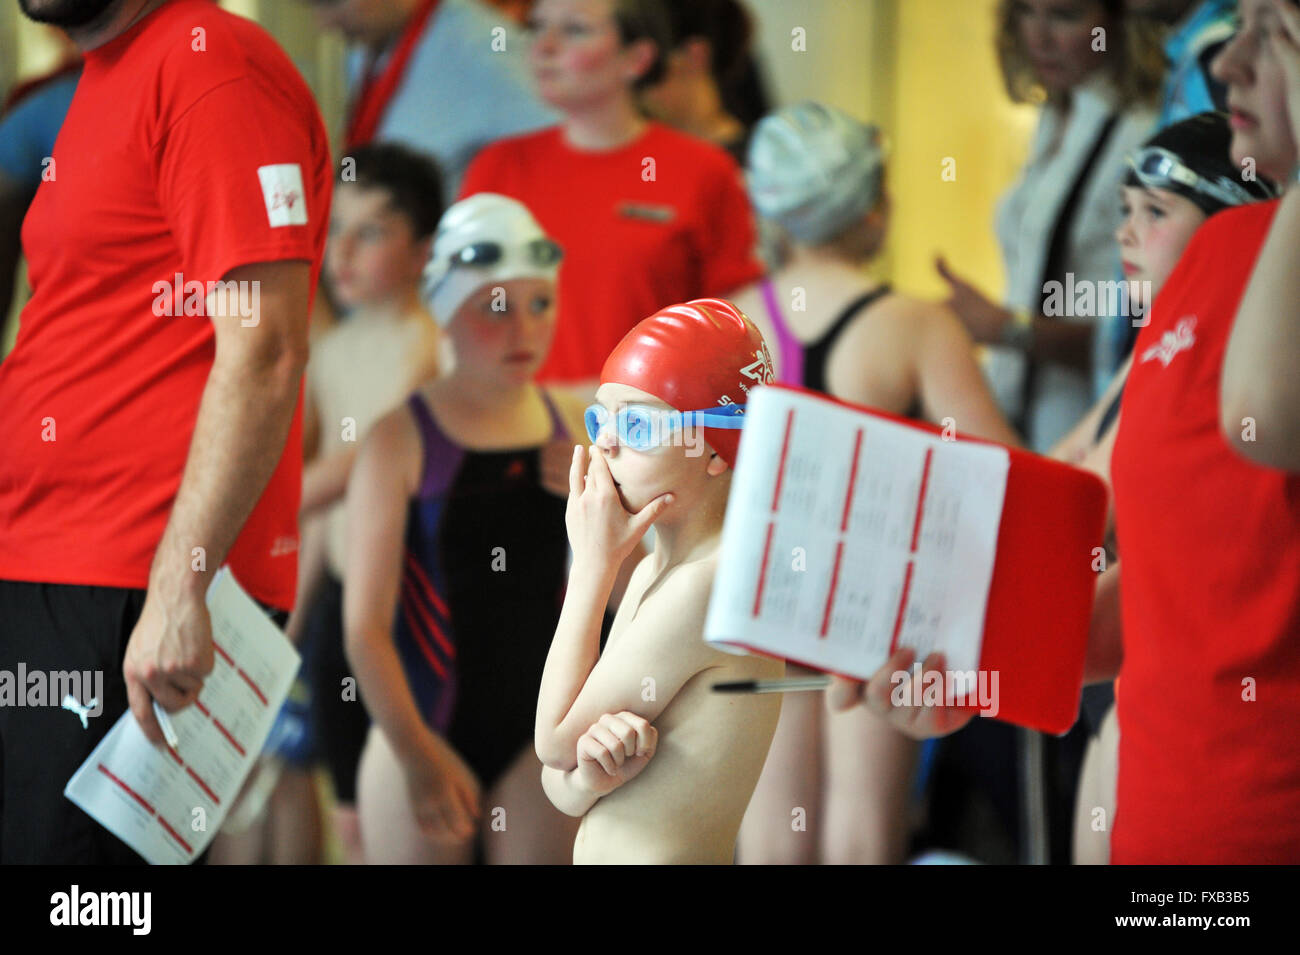 Swimming gala, children wait for the results of races. Stock Photo